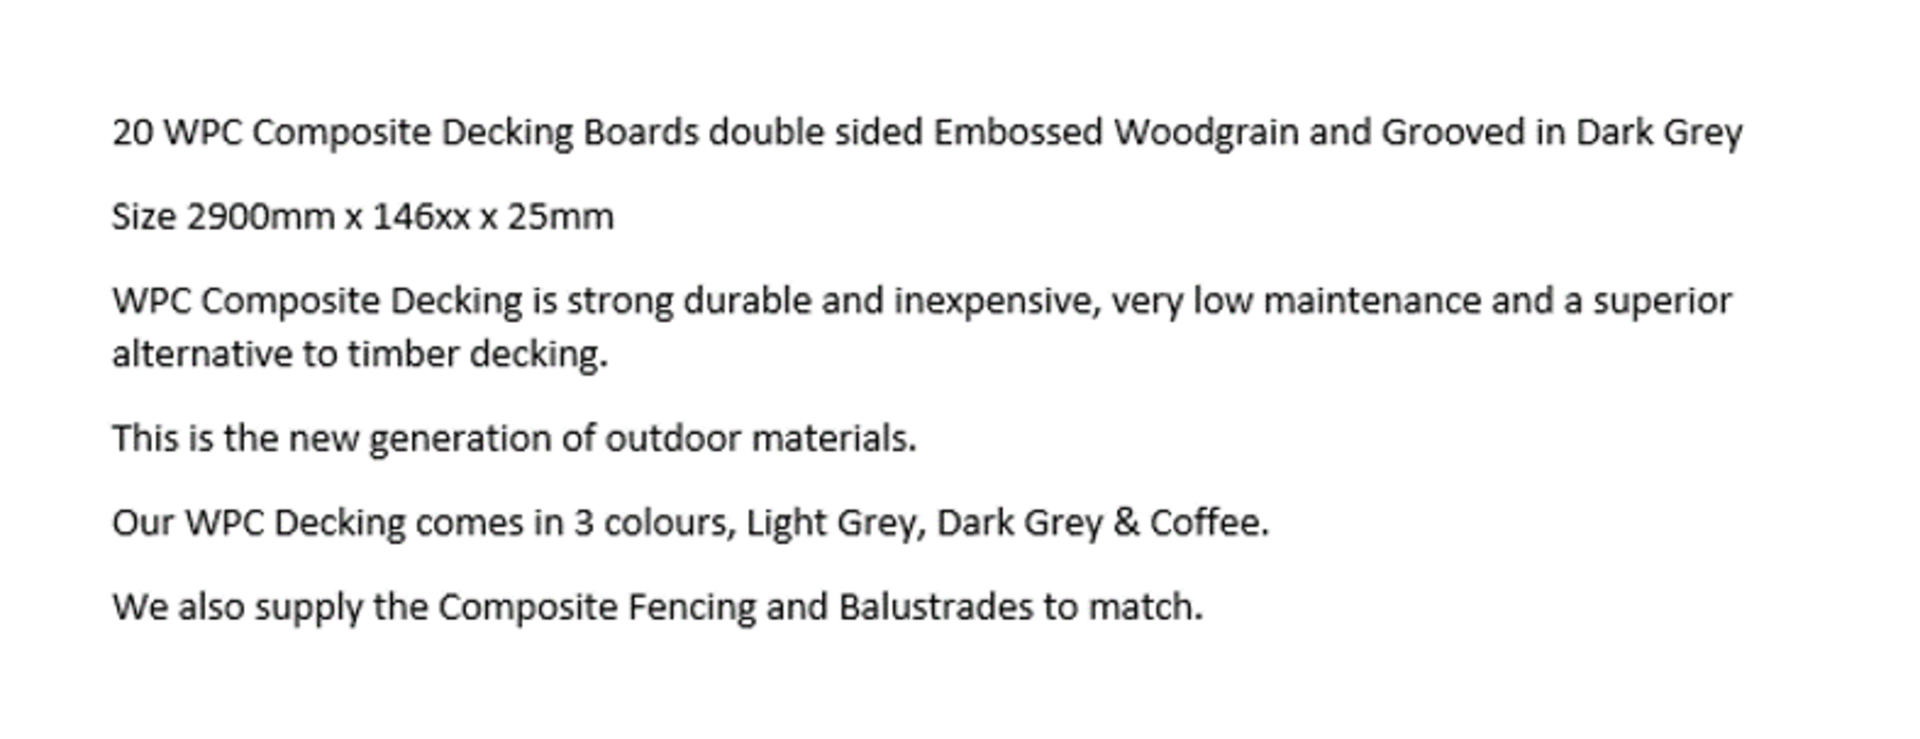 * 20 WPC Composite Dark Grey Double sided Embossed Woodgrain Decking Boards 2900mm x 146mm x 25mm - Image 5 of 5